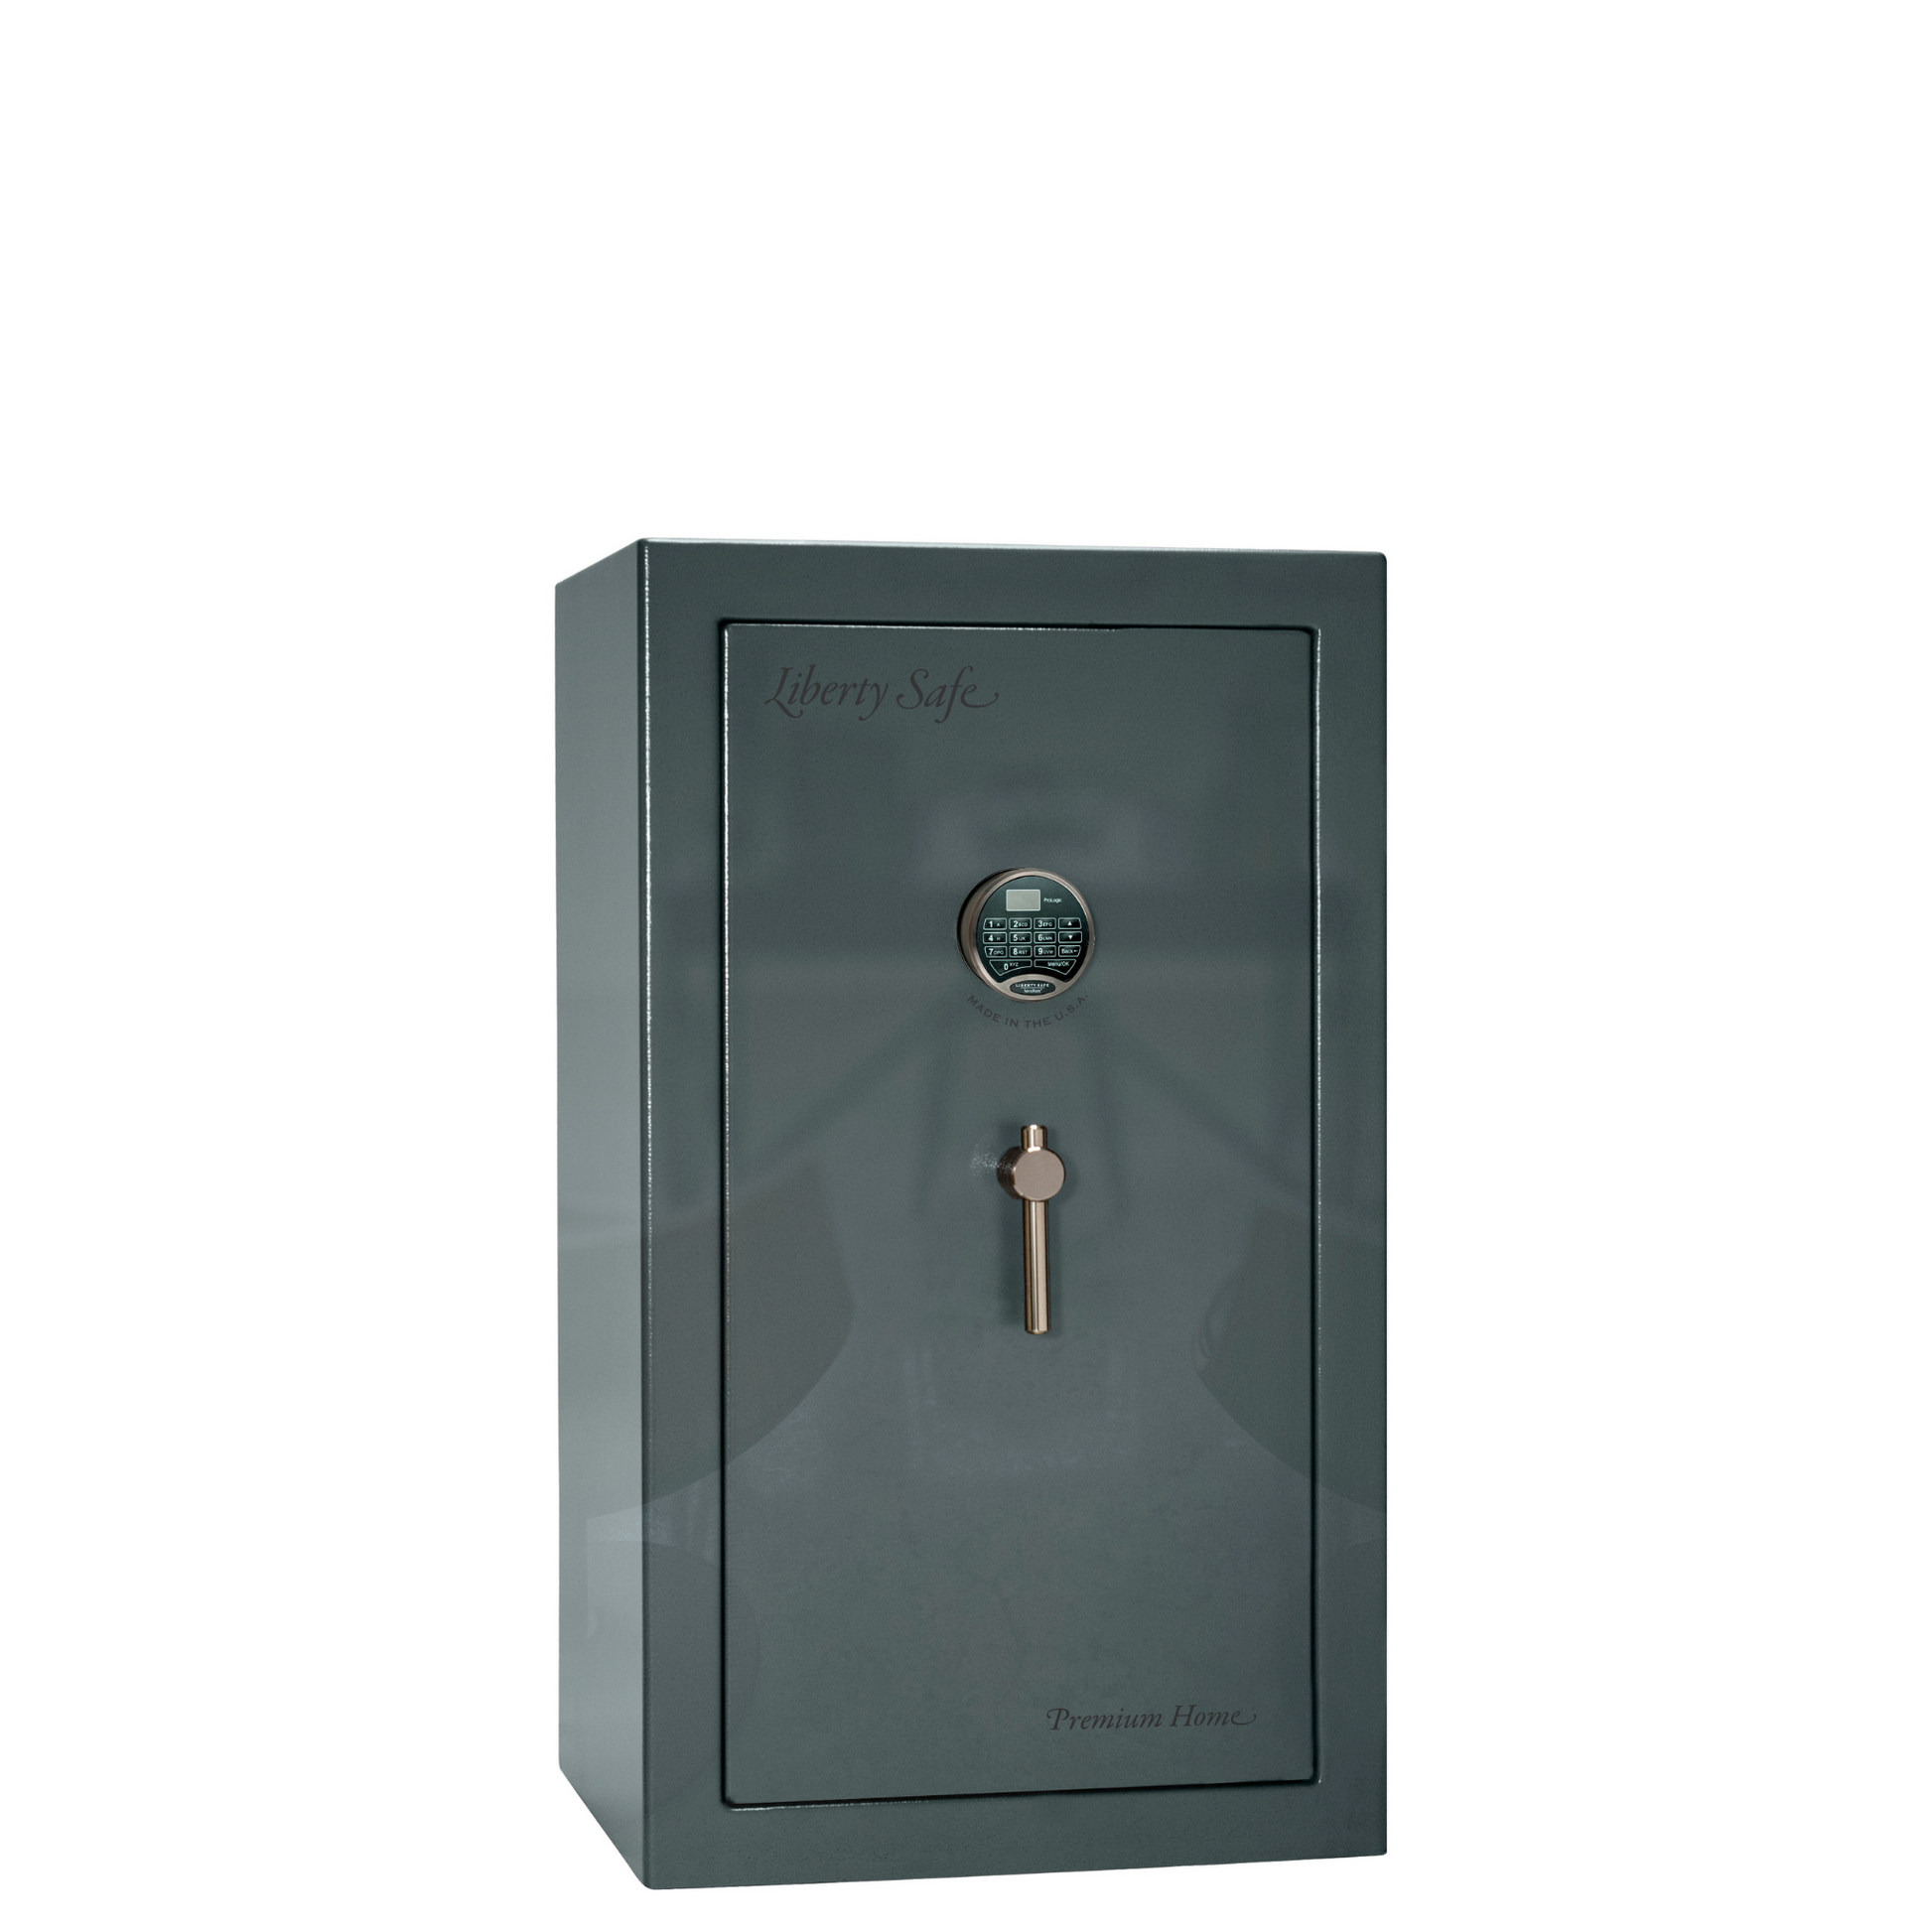 Premium Home Series | Level 7 Security | 2 Hour Fire Protection | 12 | Dimensions: 41.75"(H) x 24.5"(W) x 19"(D) | Forest Mist Gloss - Closed Door